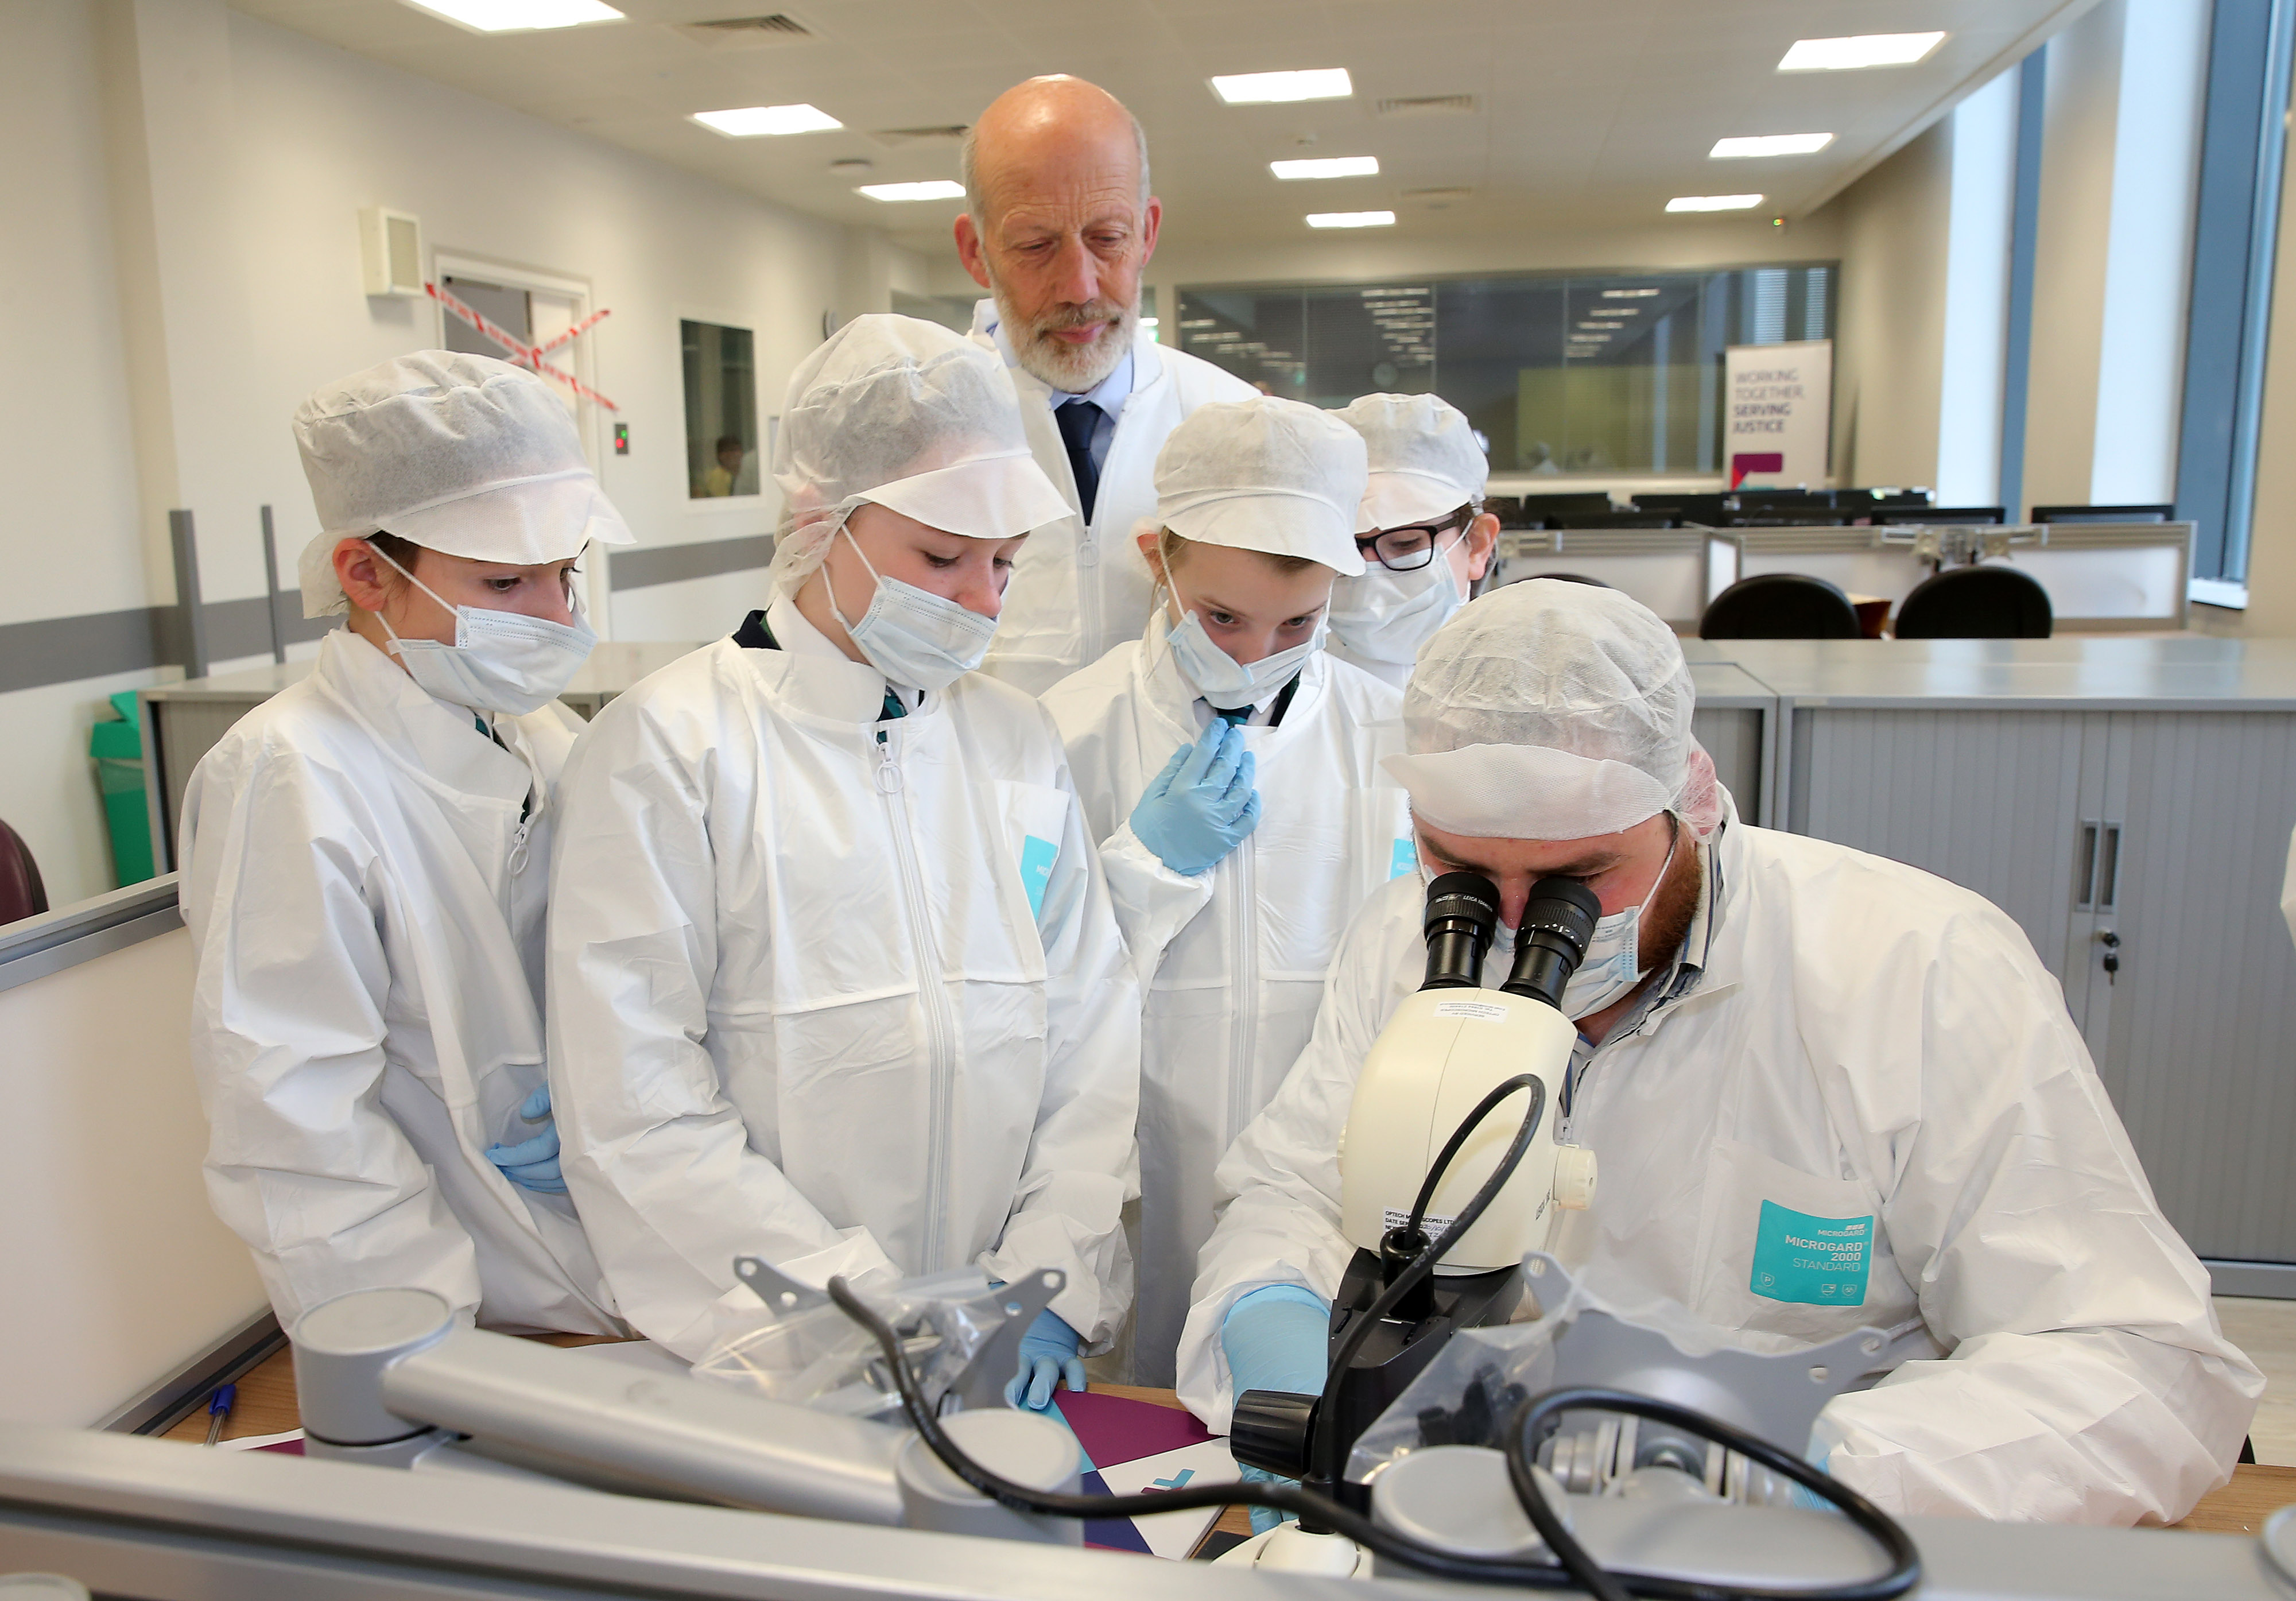 Justice Minister officially opens new £13.9 million forensic science ...